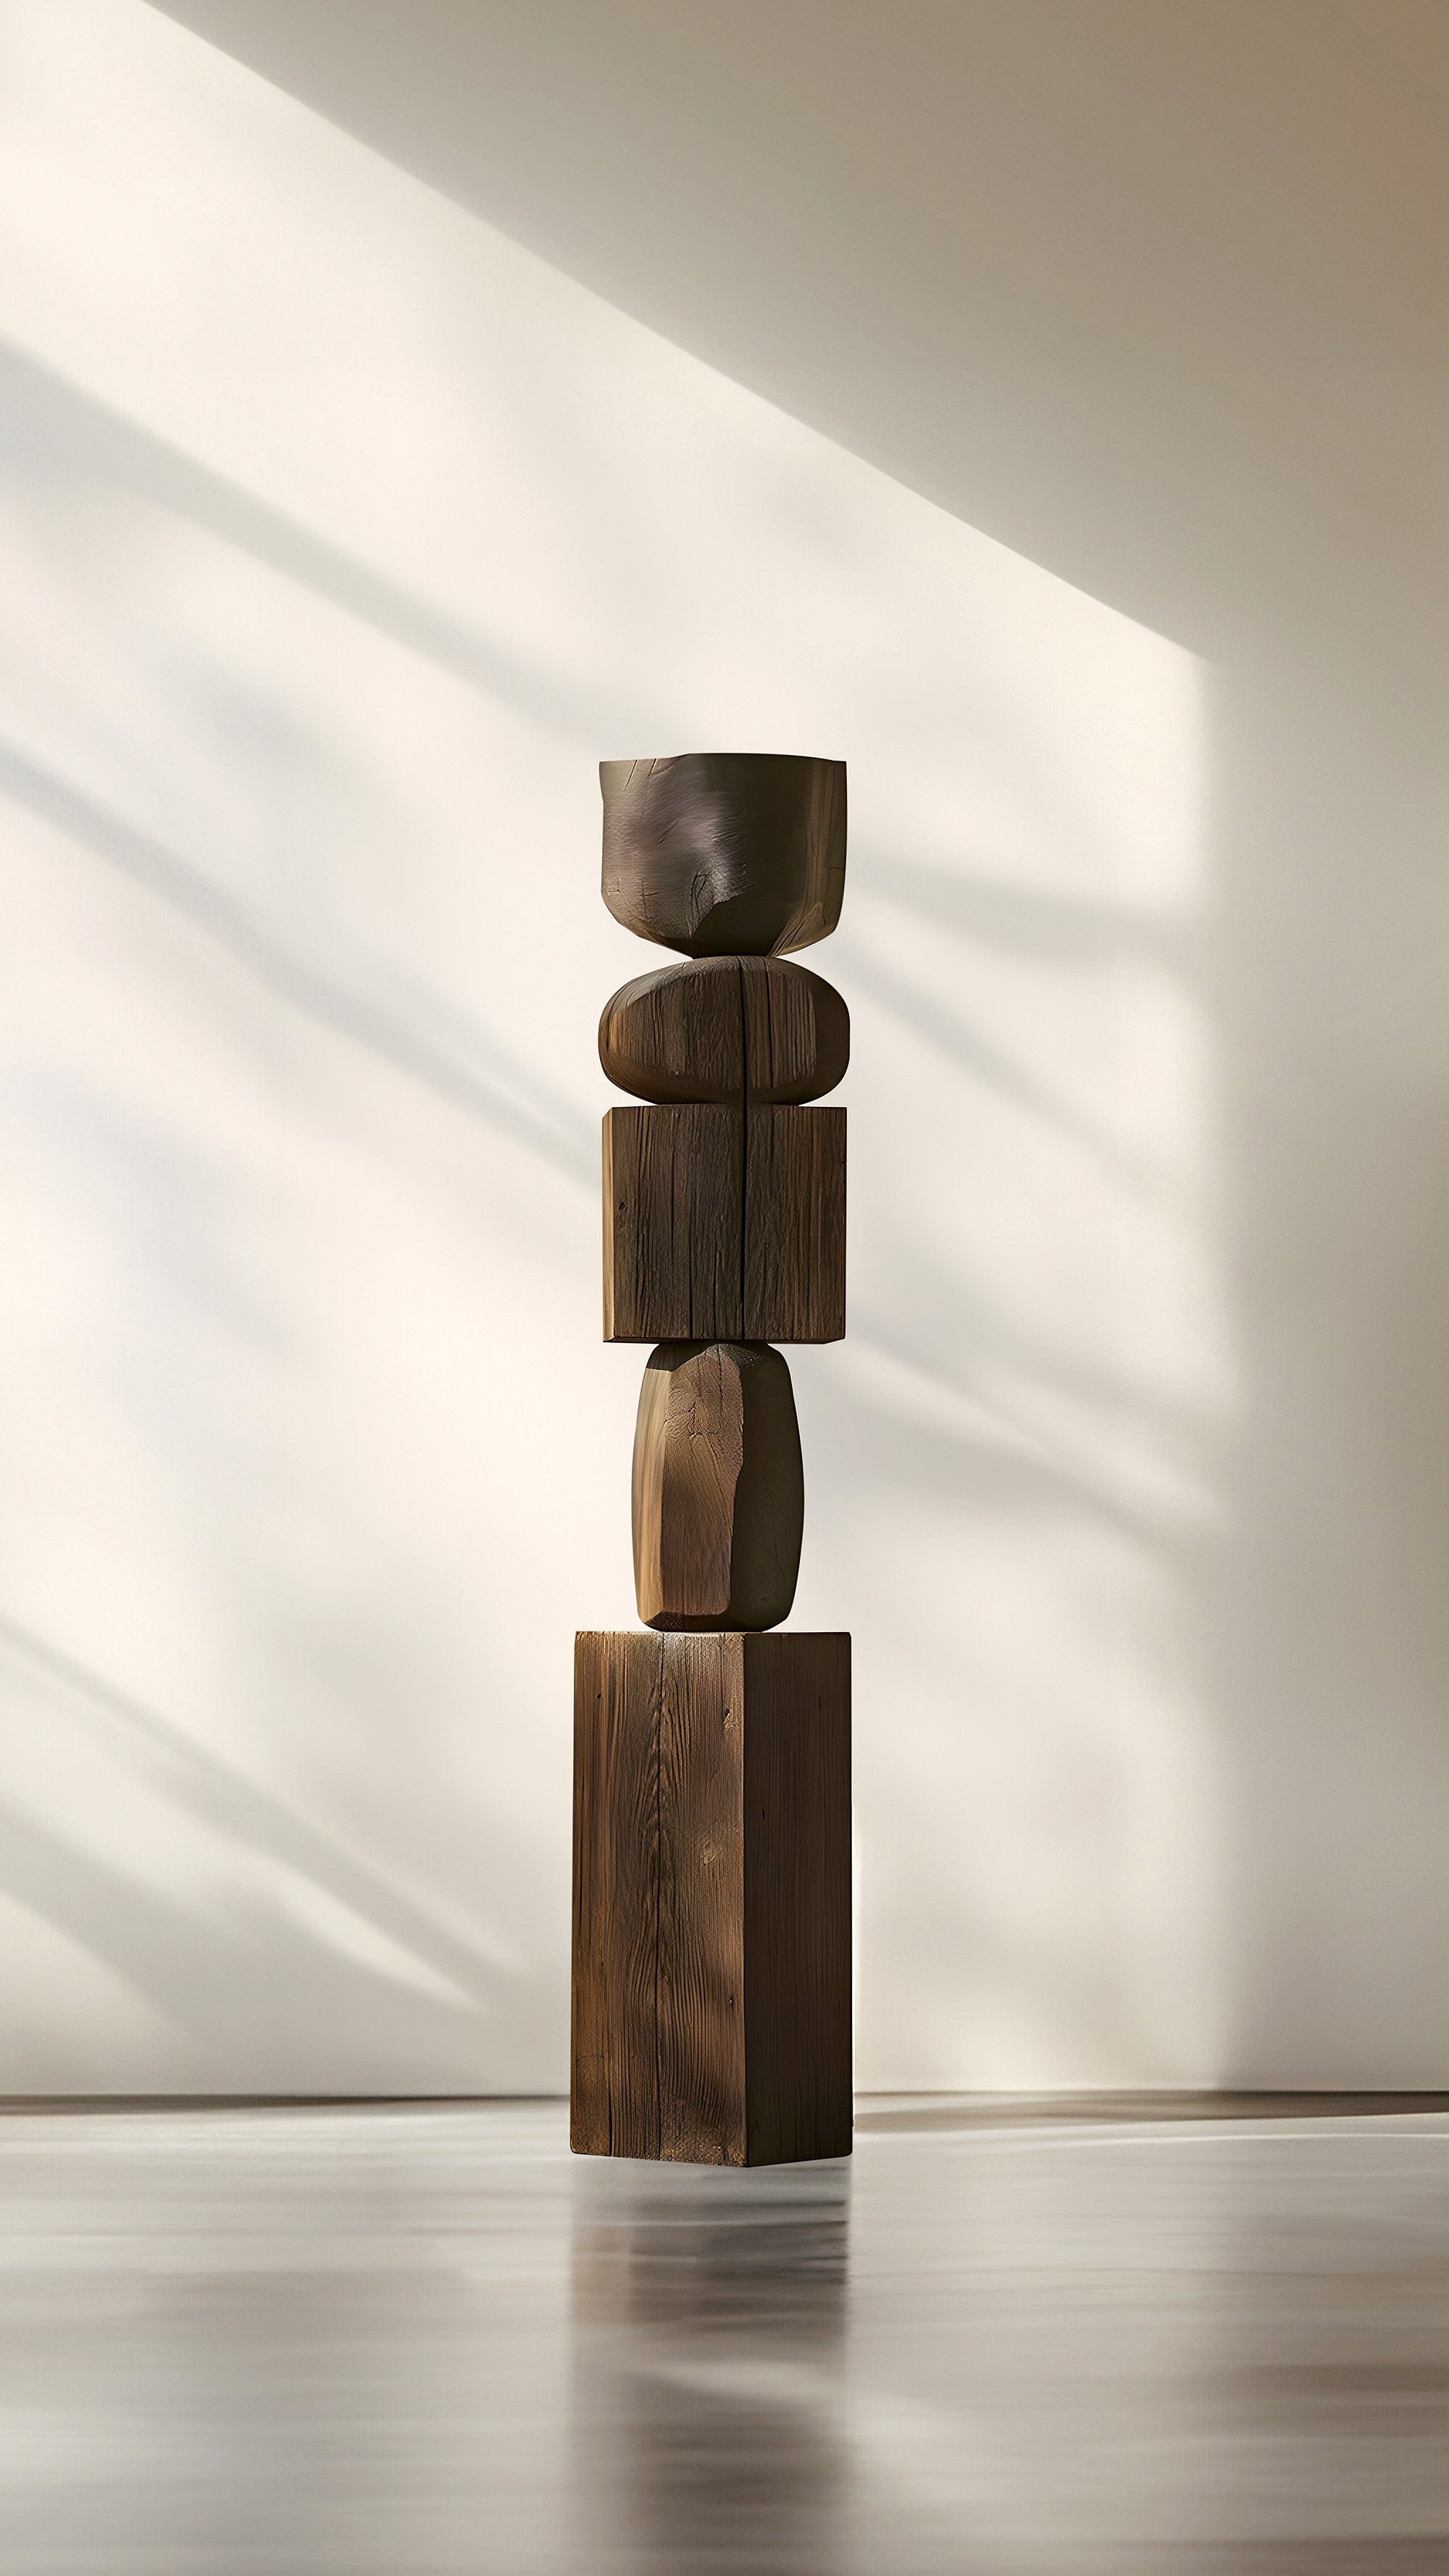 Burned Oak Sculpture, Abstract Elegance by Escalona, Captured in Still Stand No85 -5.jpg